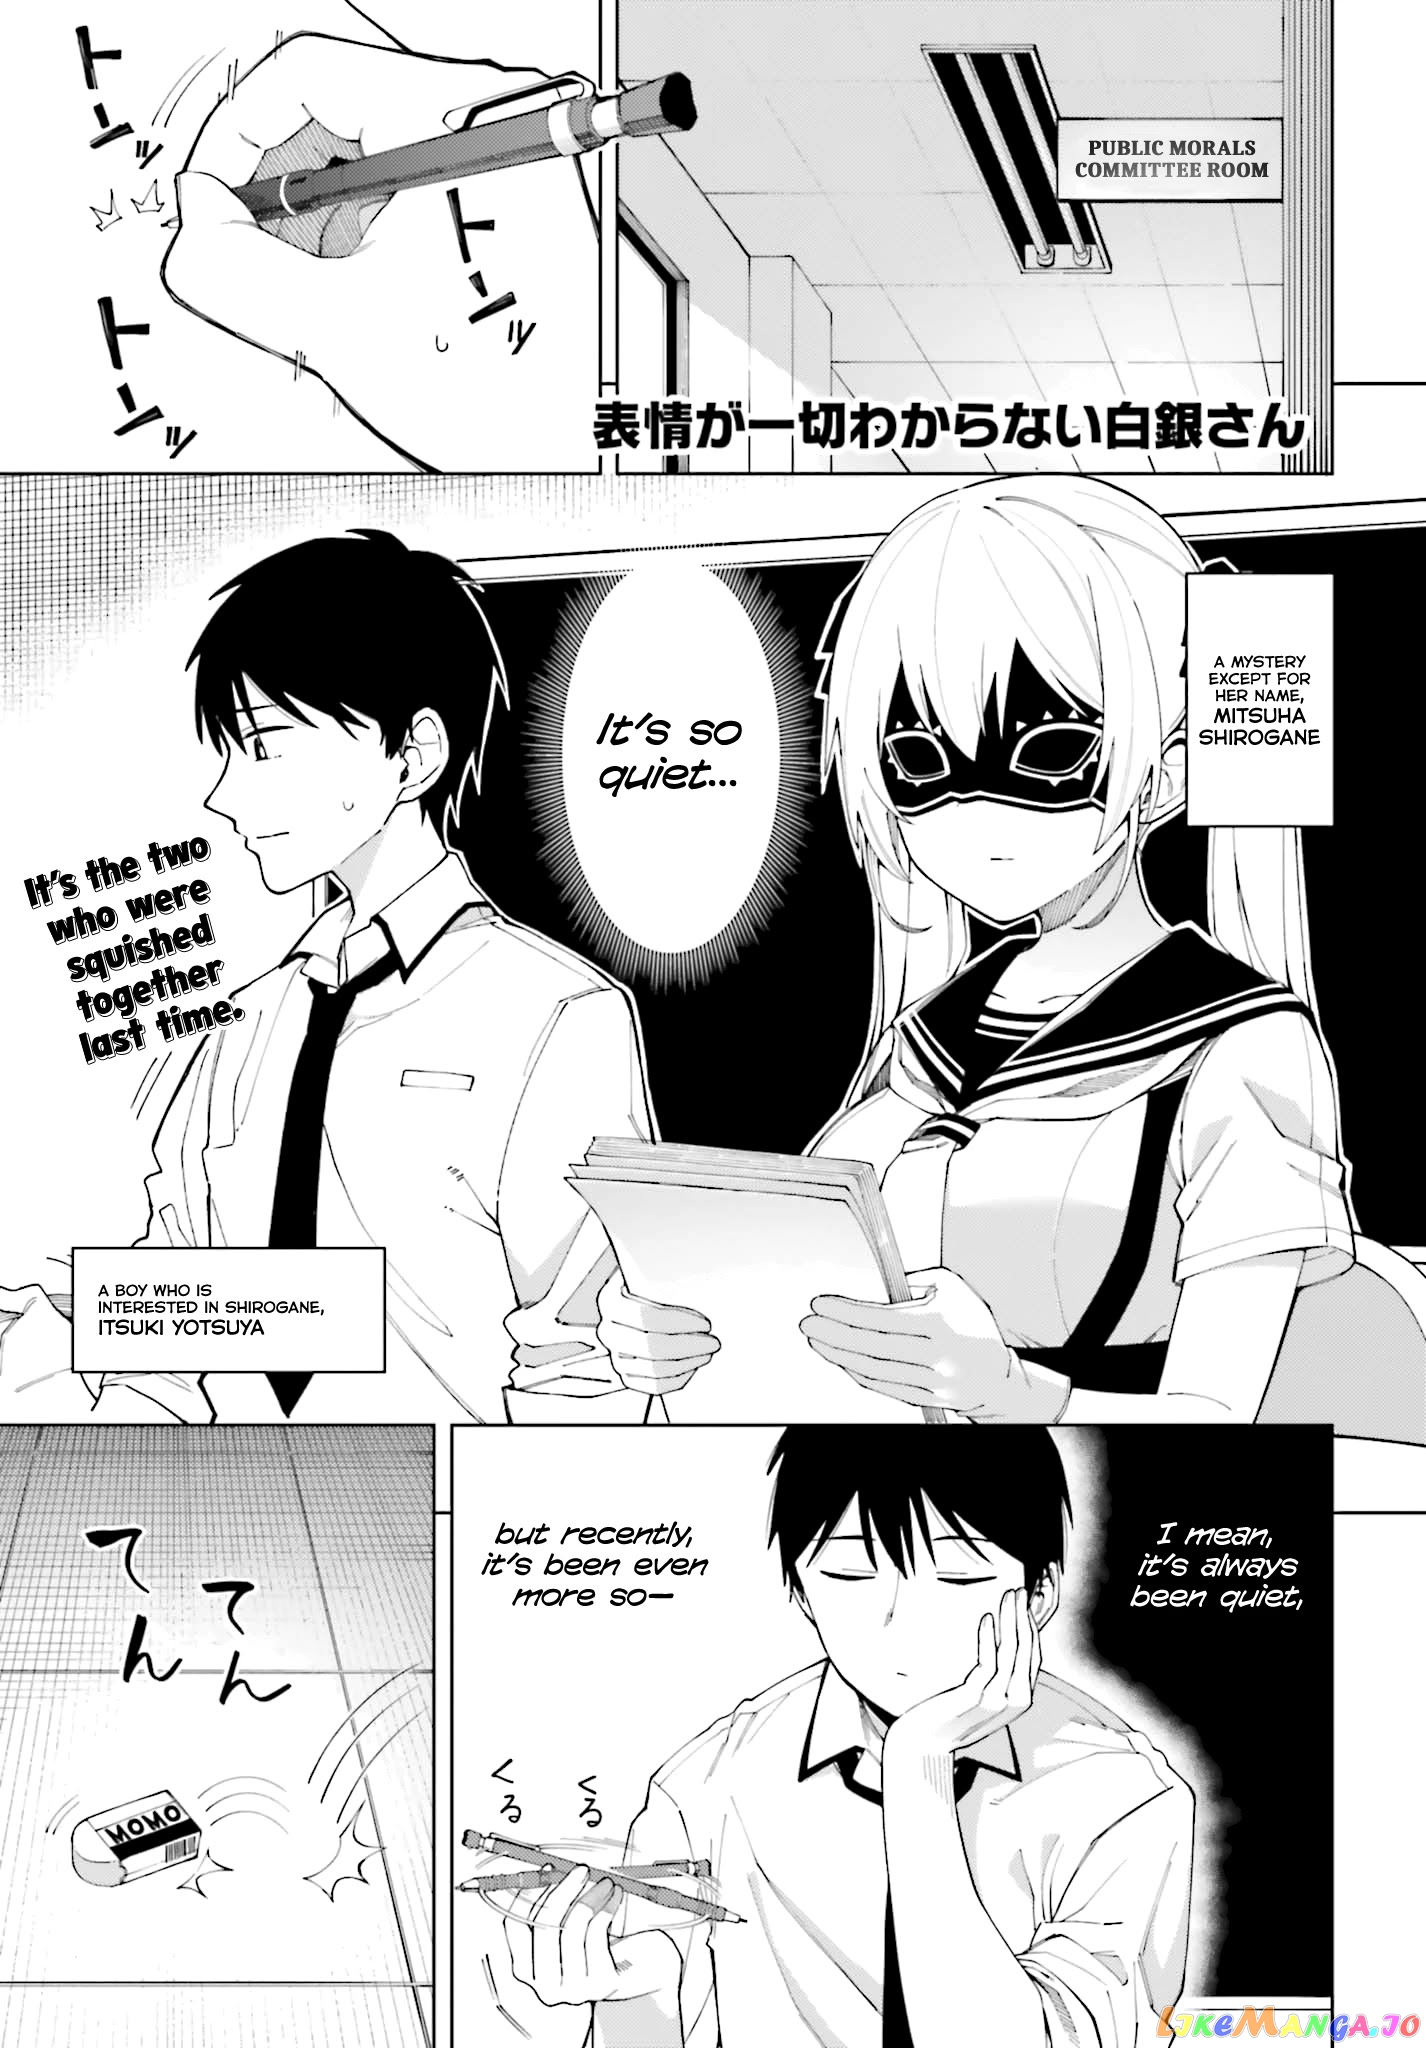 I Don’t Understand Shirogane-San’s Facial Expression At All chapter 2 - page 1